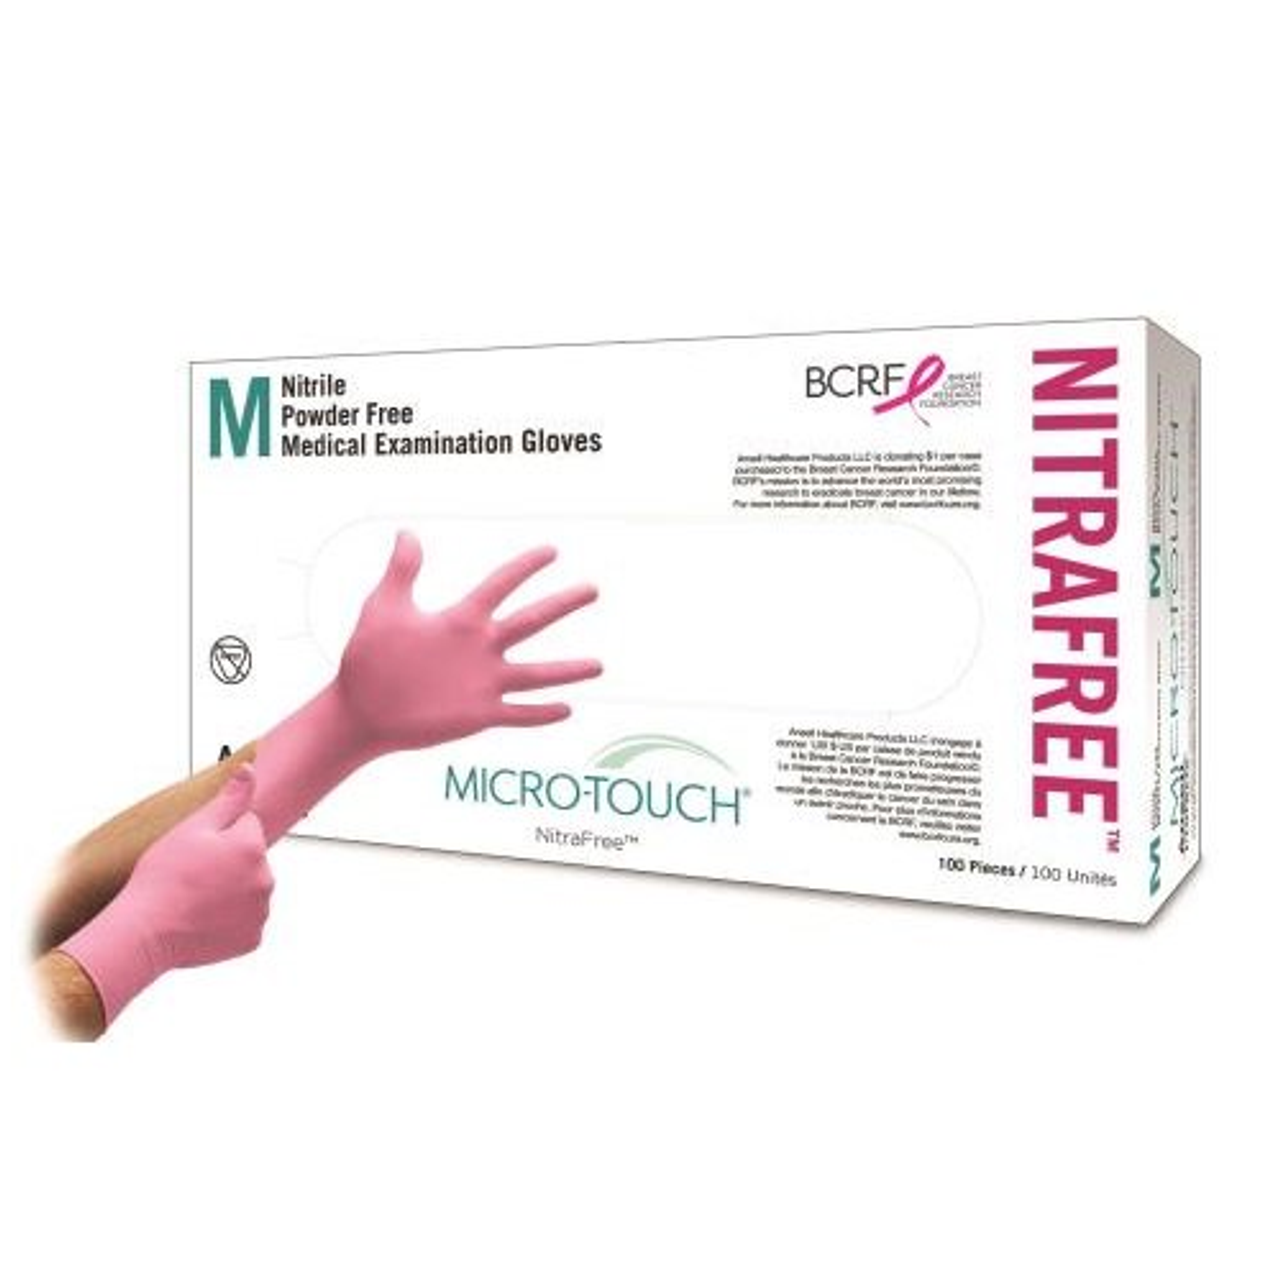 Ansell Micro-Touch Nitrafree Examination Gloves X-Small, Pink, 100/bx